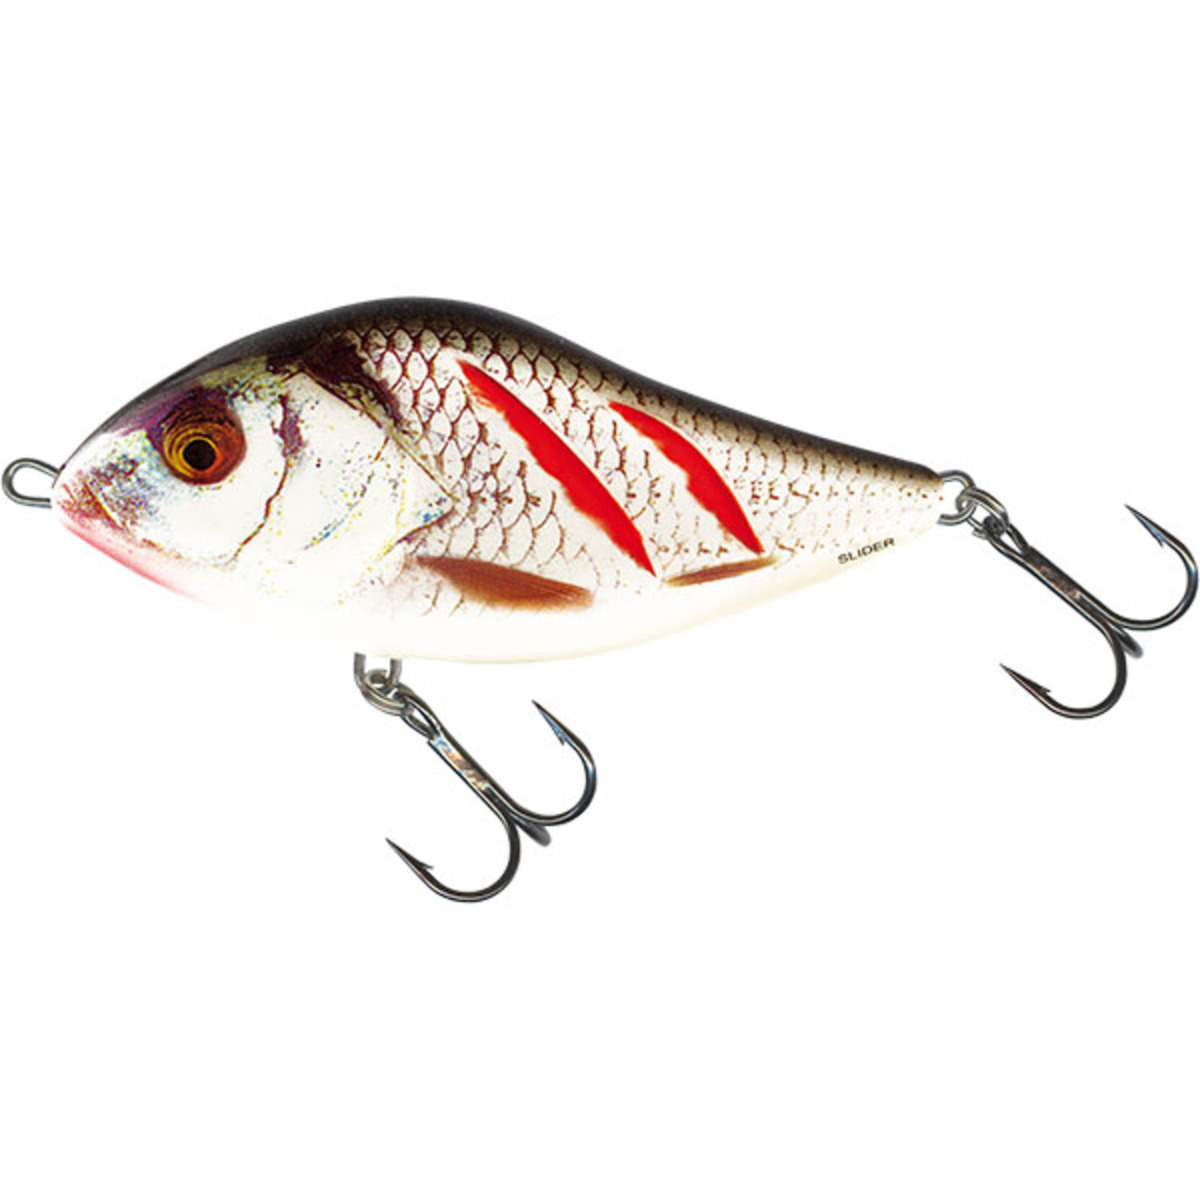 Salmo Slider Sinking - 16 Cm - Wounded Real Grey Shiner